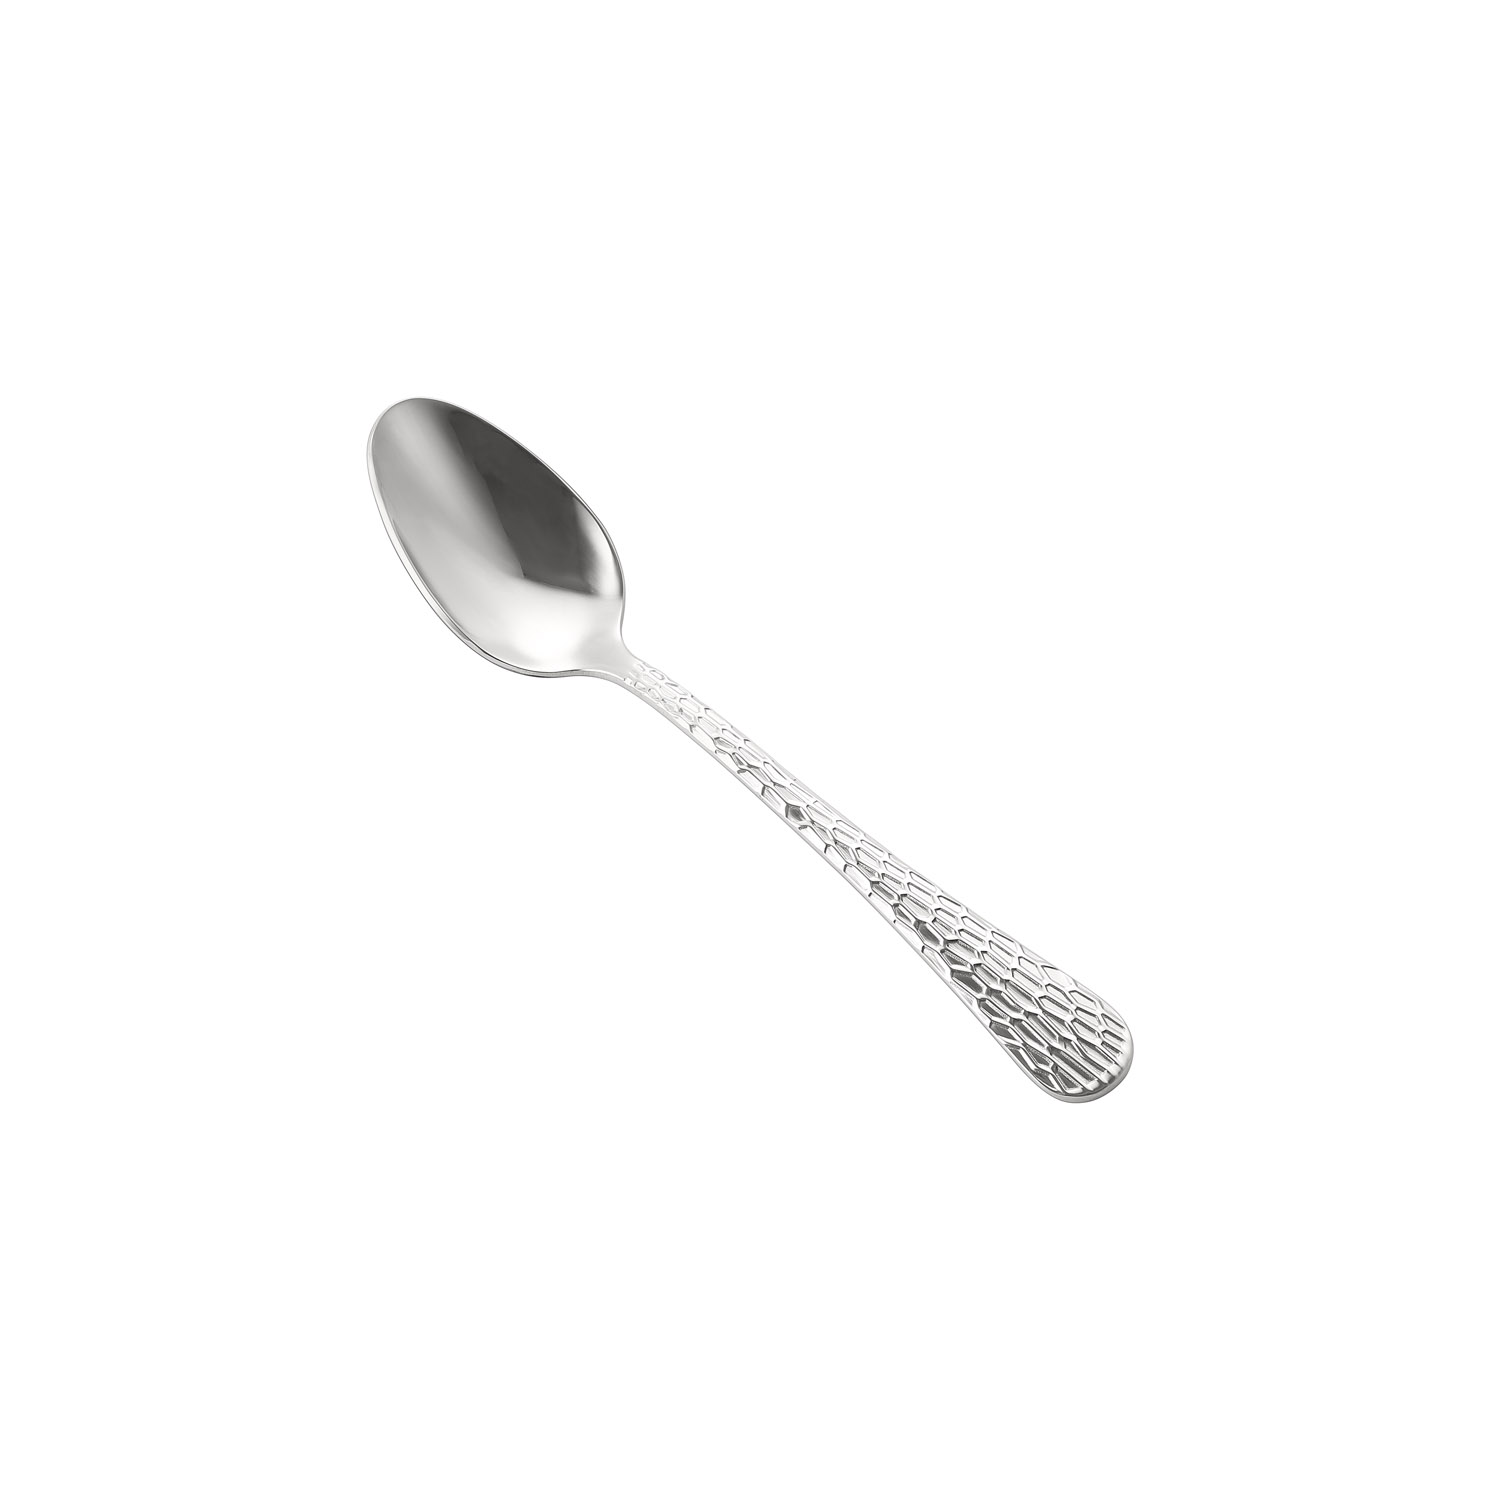 CAC China 3015-03 Celtic Dinner Spoon, Heavyweight 18/0, 7-3/8"